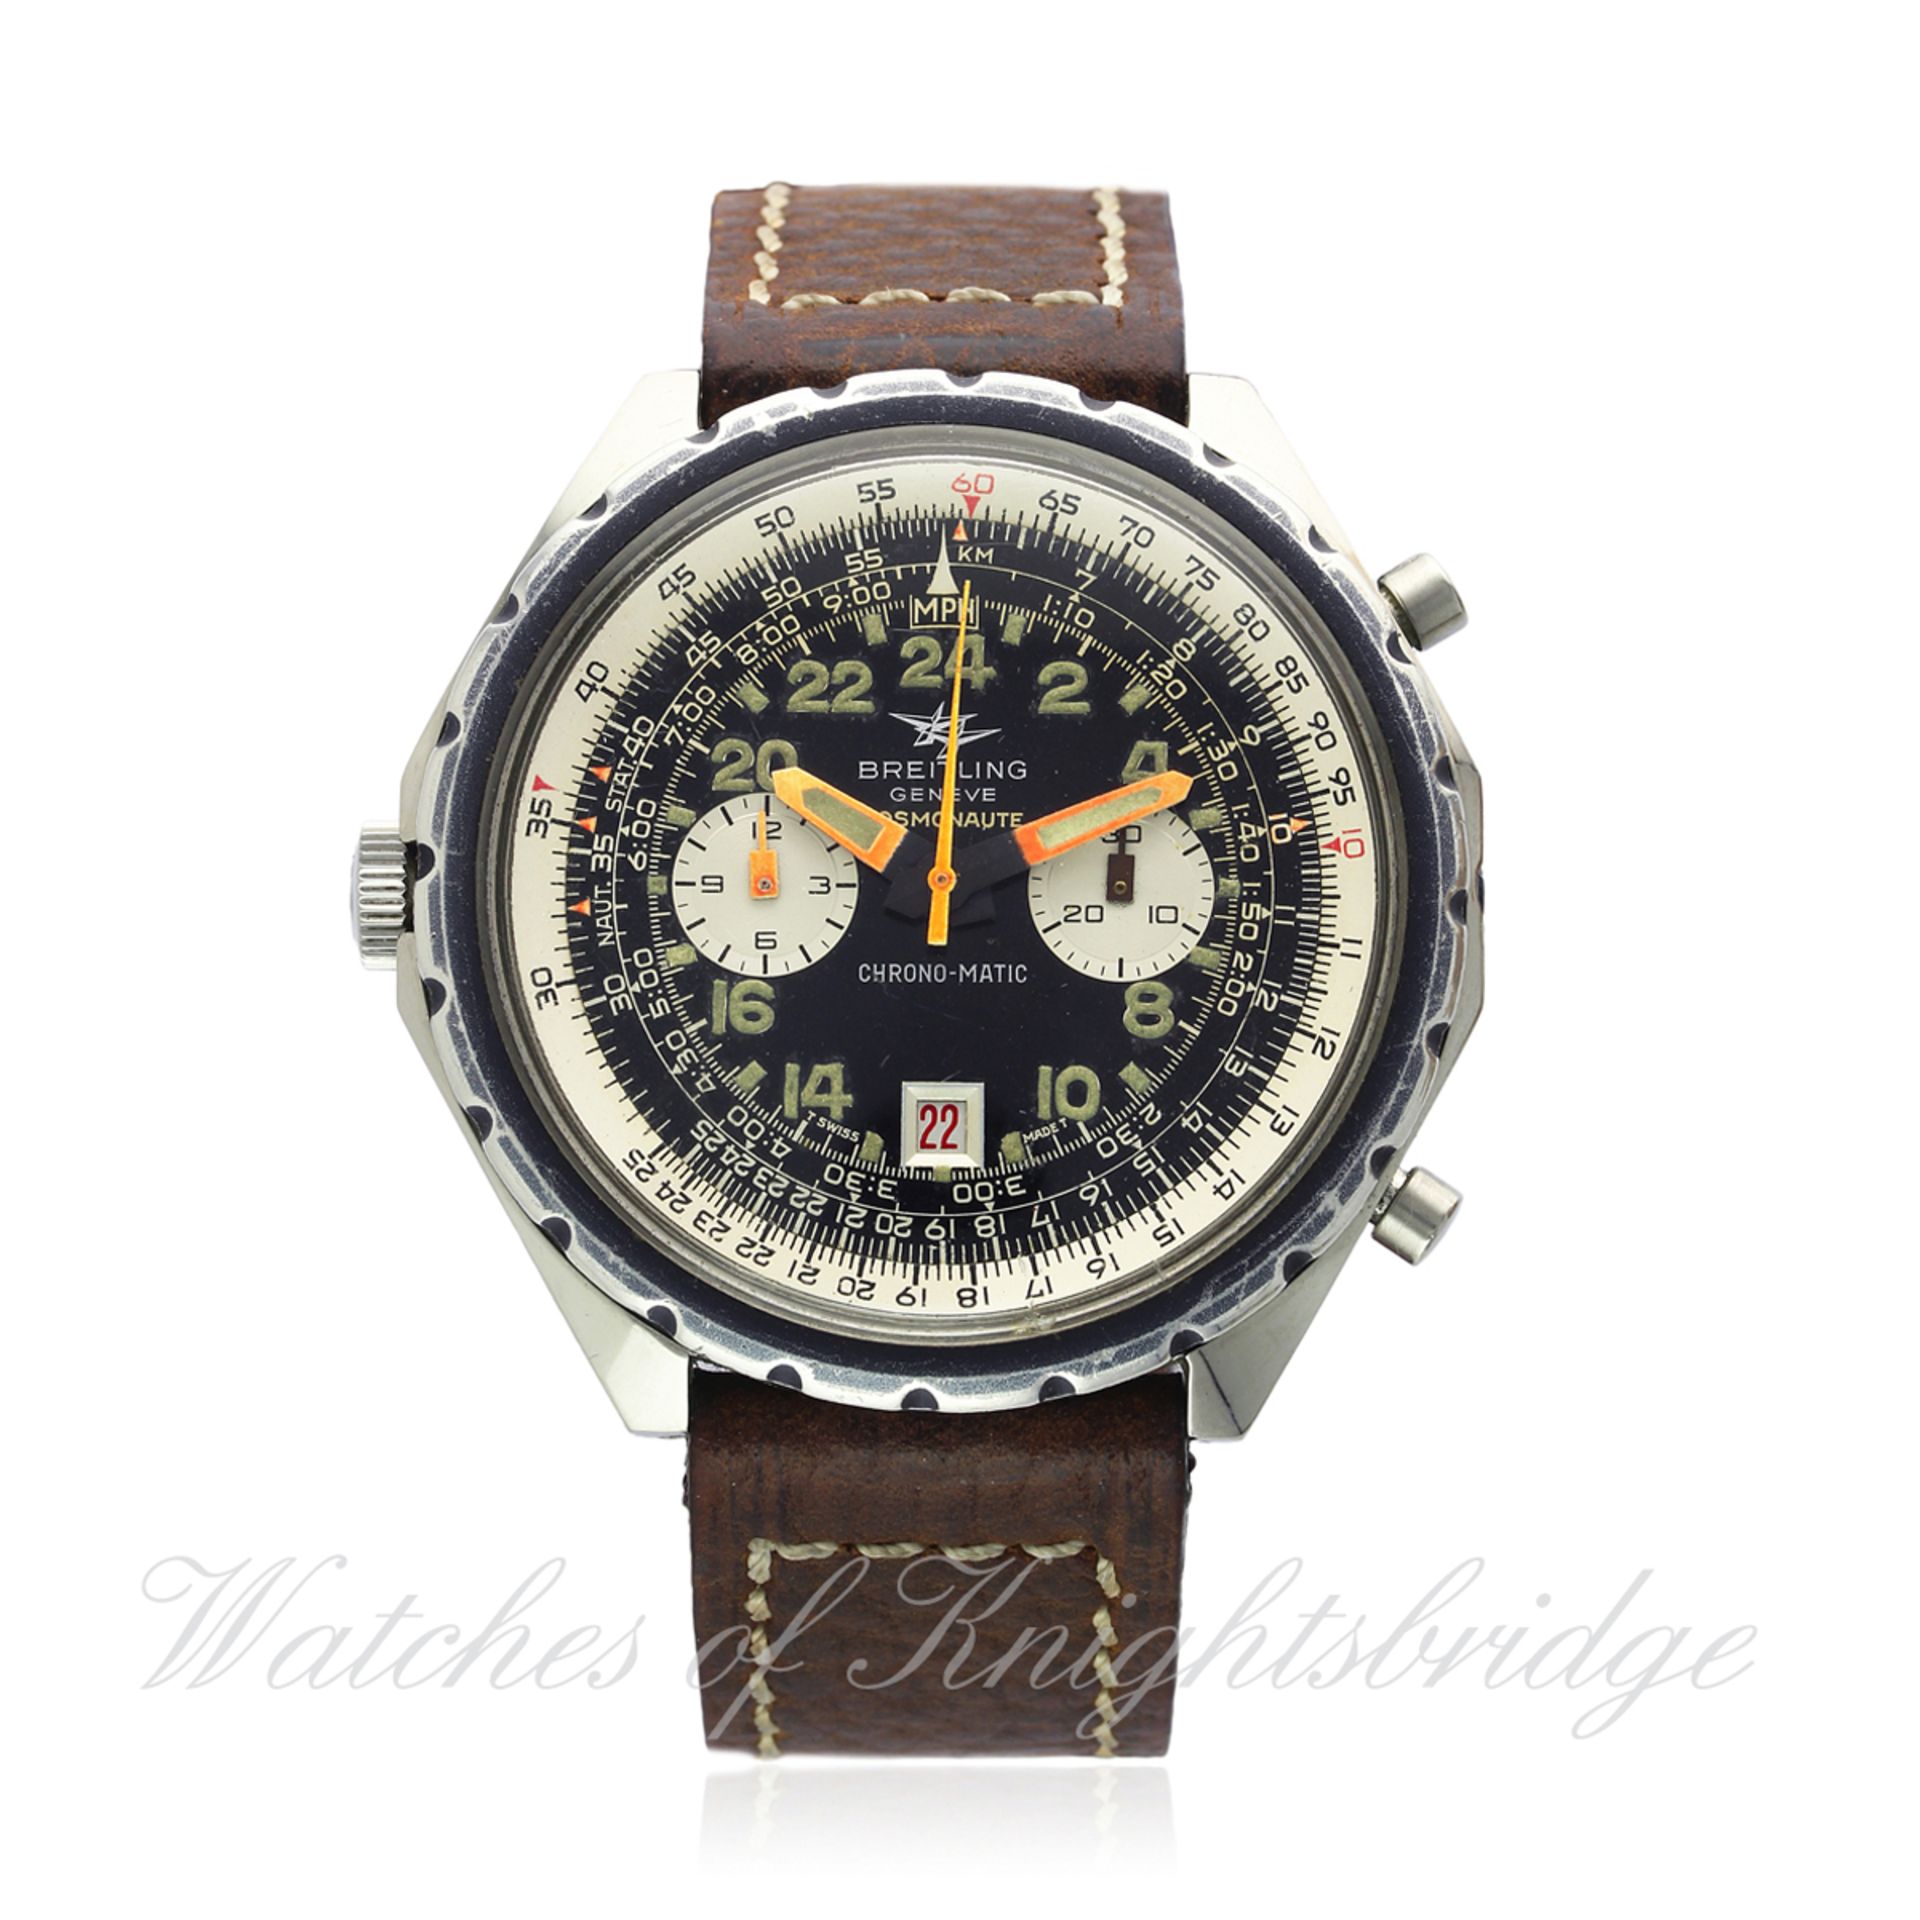 A RARE GENTLEMAN`S STAINLESS STEEL BREITLING 24 HOUR COSMONAUTE CHRONO-MATIC CHRONOGRAPH WRIST WATCH